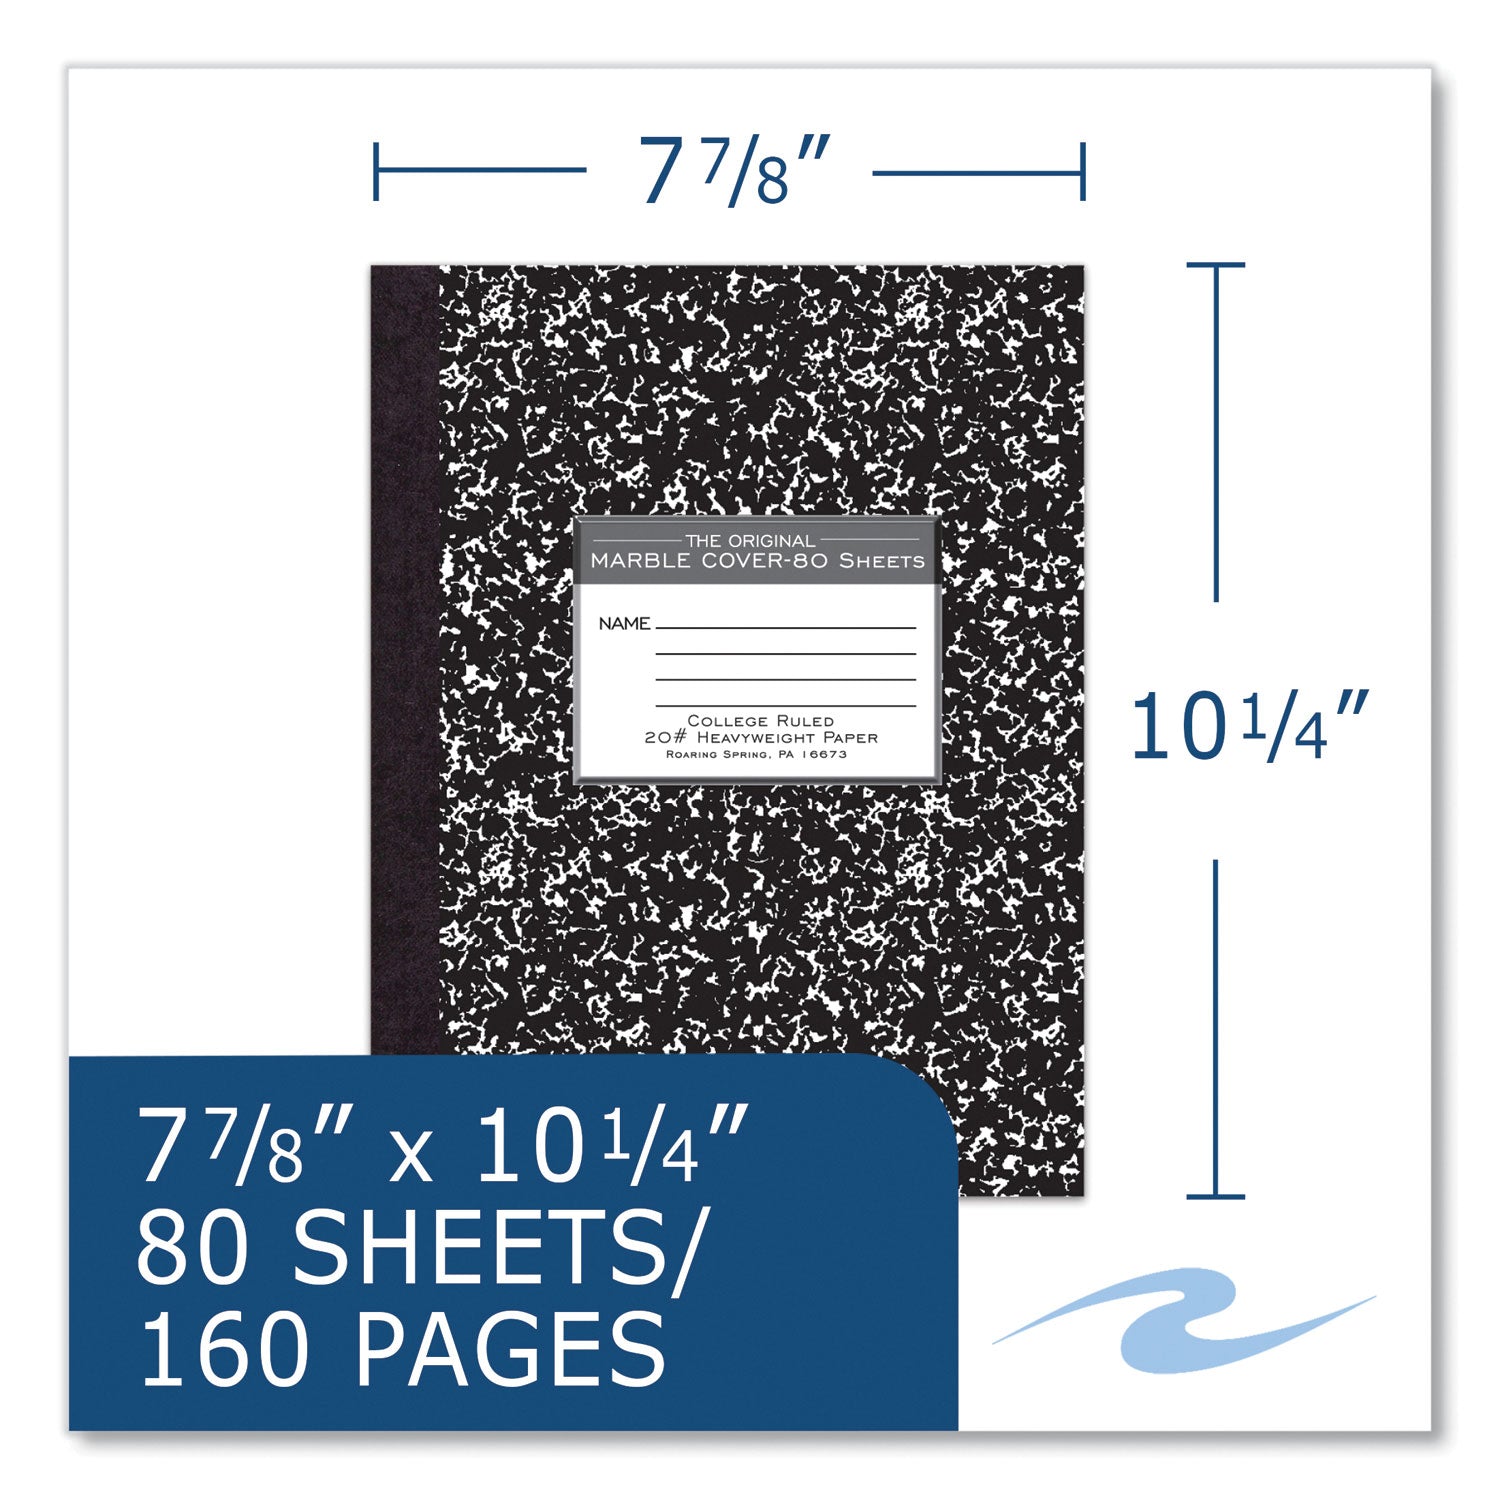 hardcover-composition-book-med-college-rule-black-marble-cover-80-1025-x-788-sheet-24-ct-ships-in-4-6-bus-days_roa77461cs - 7